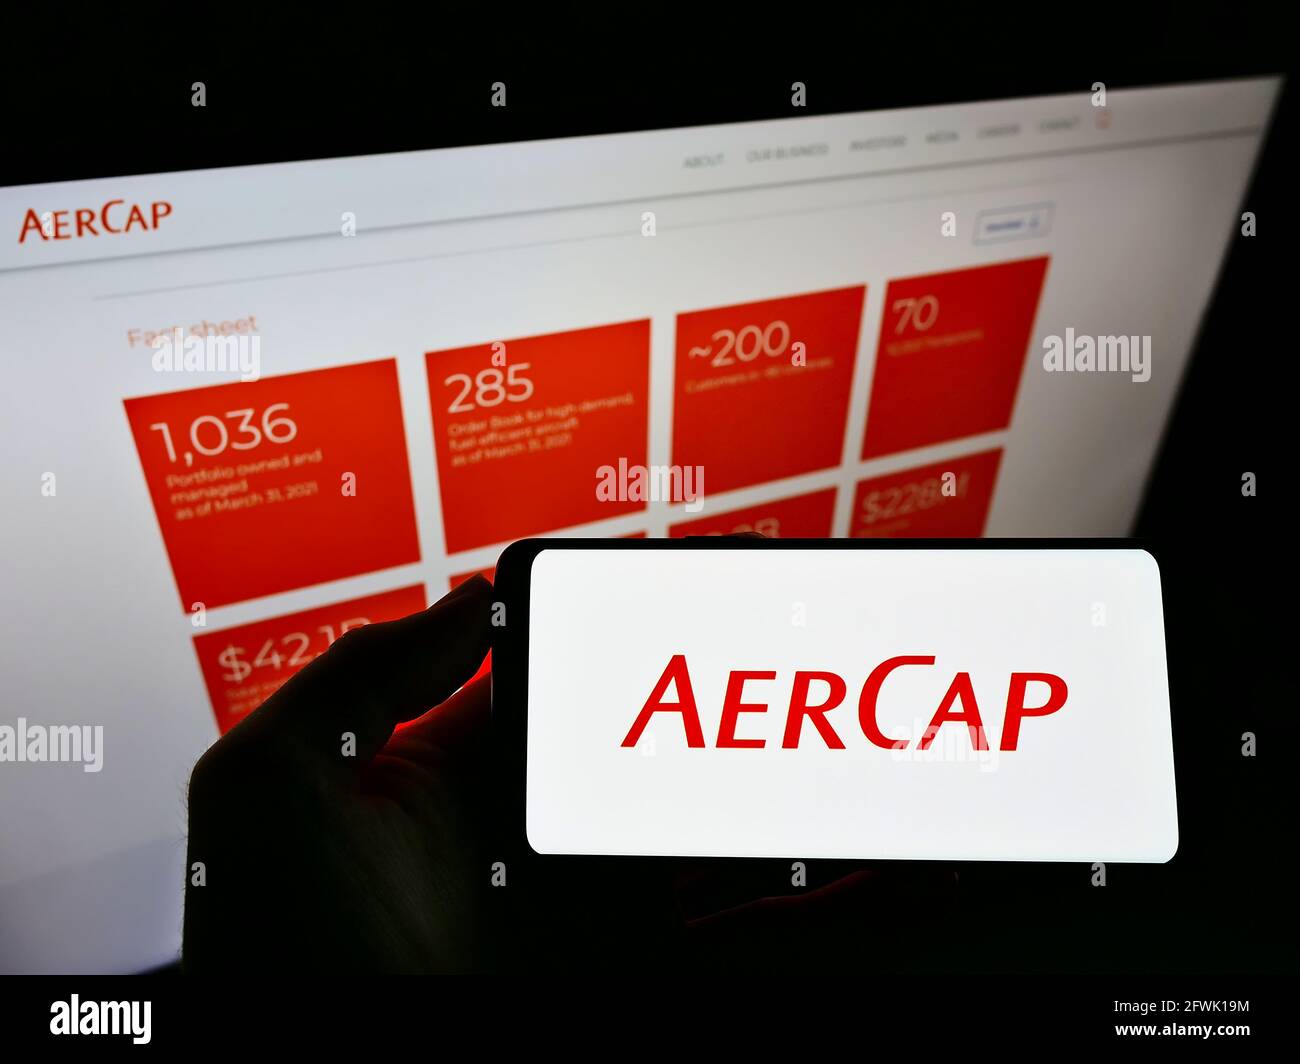 Person holding smartphone with logo of aircraft leasing company AerCap Holdings N.V. on screen in front of website. Focus on phone display. Stock Photo